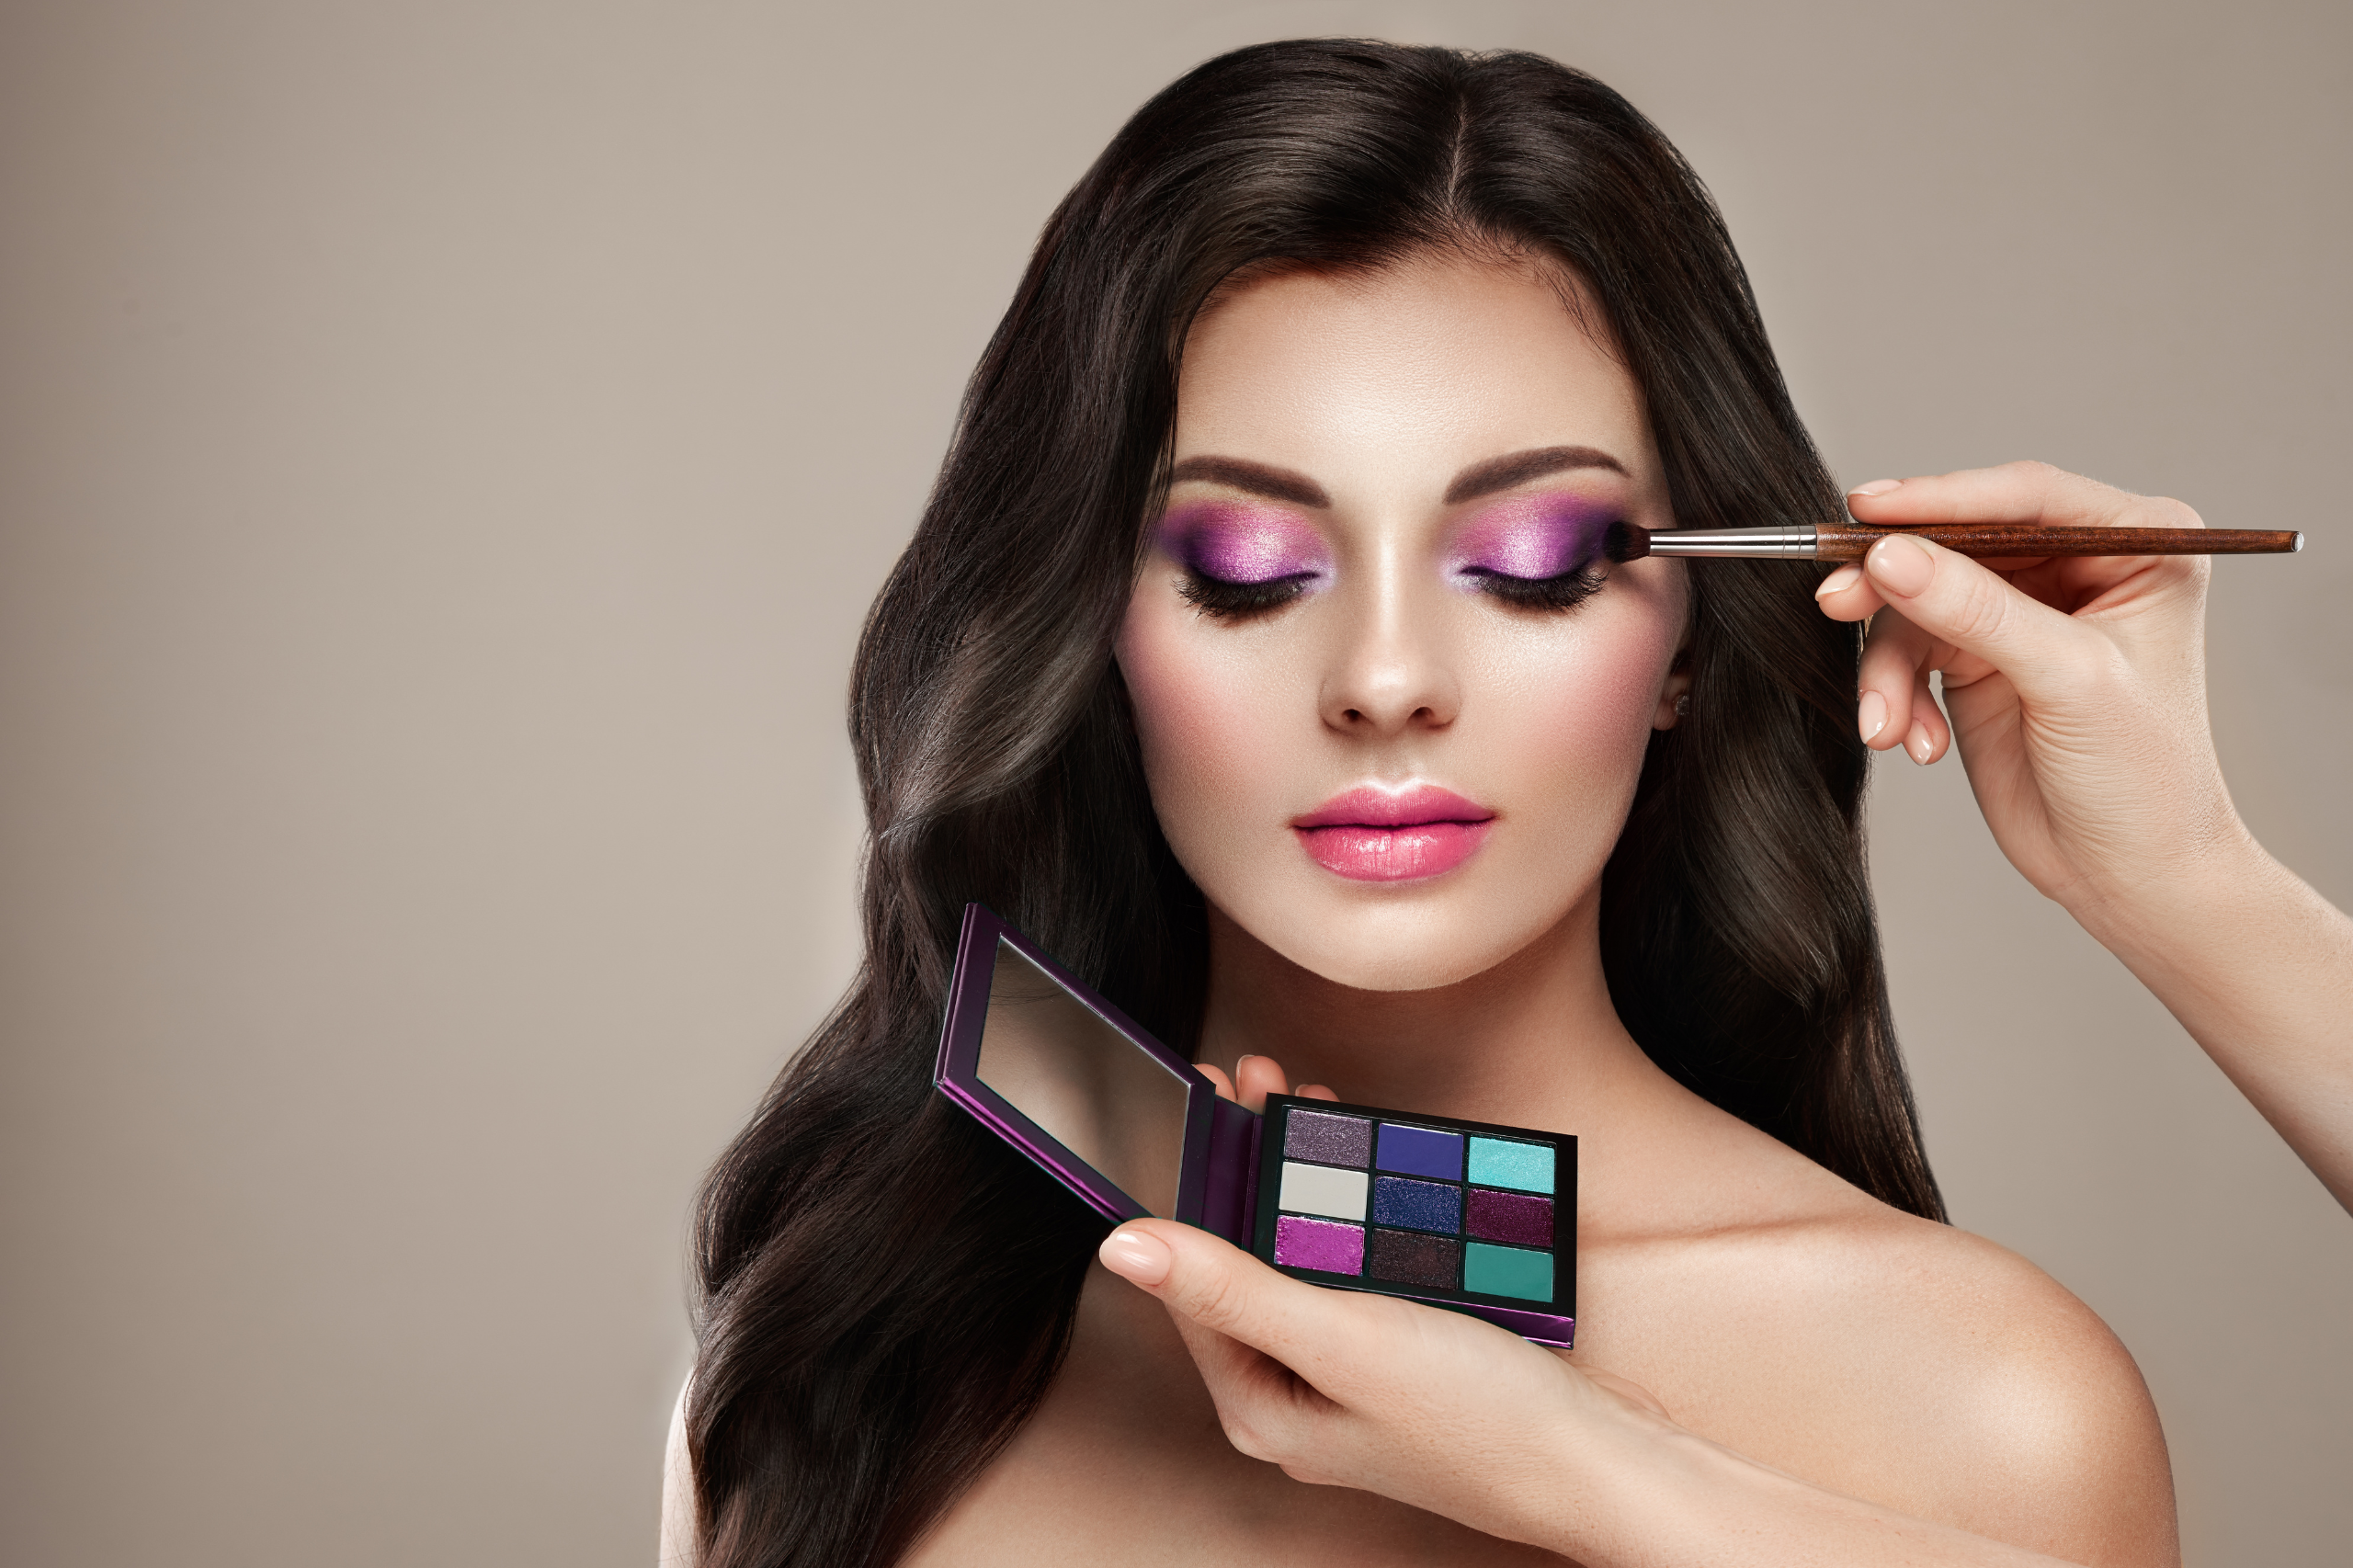 Eye Makeup Safety Guide 5 Essential Tips for Protecting Your Vision